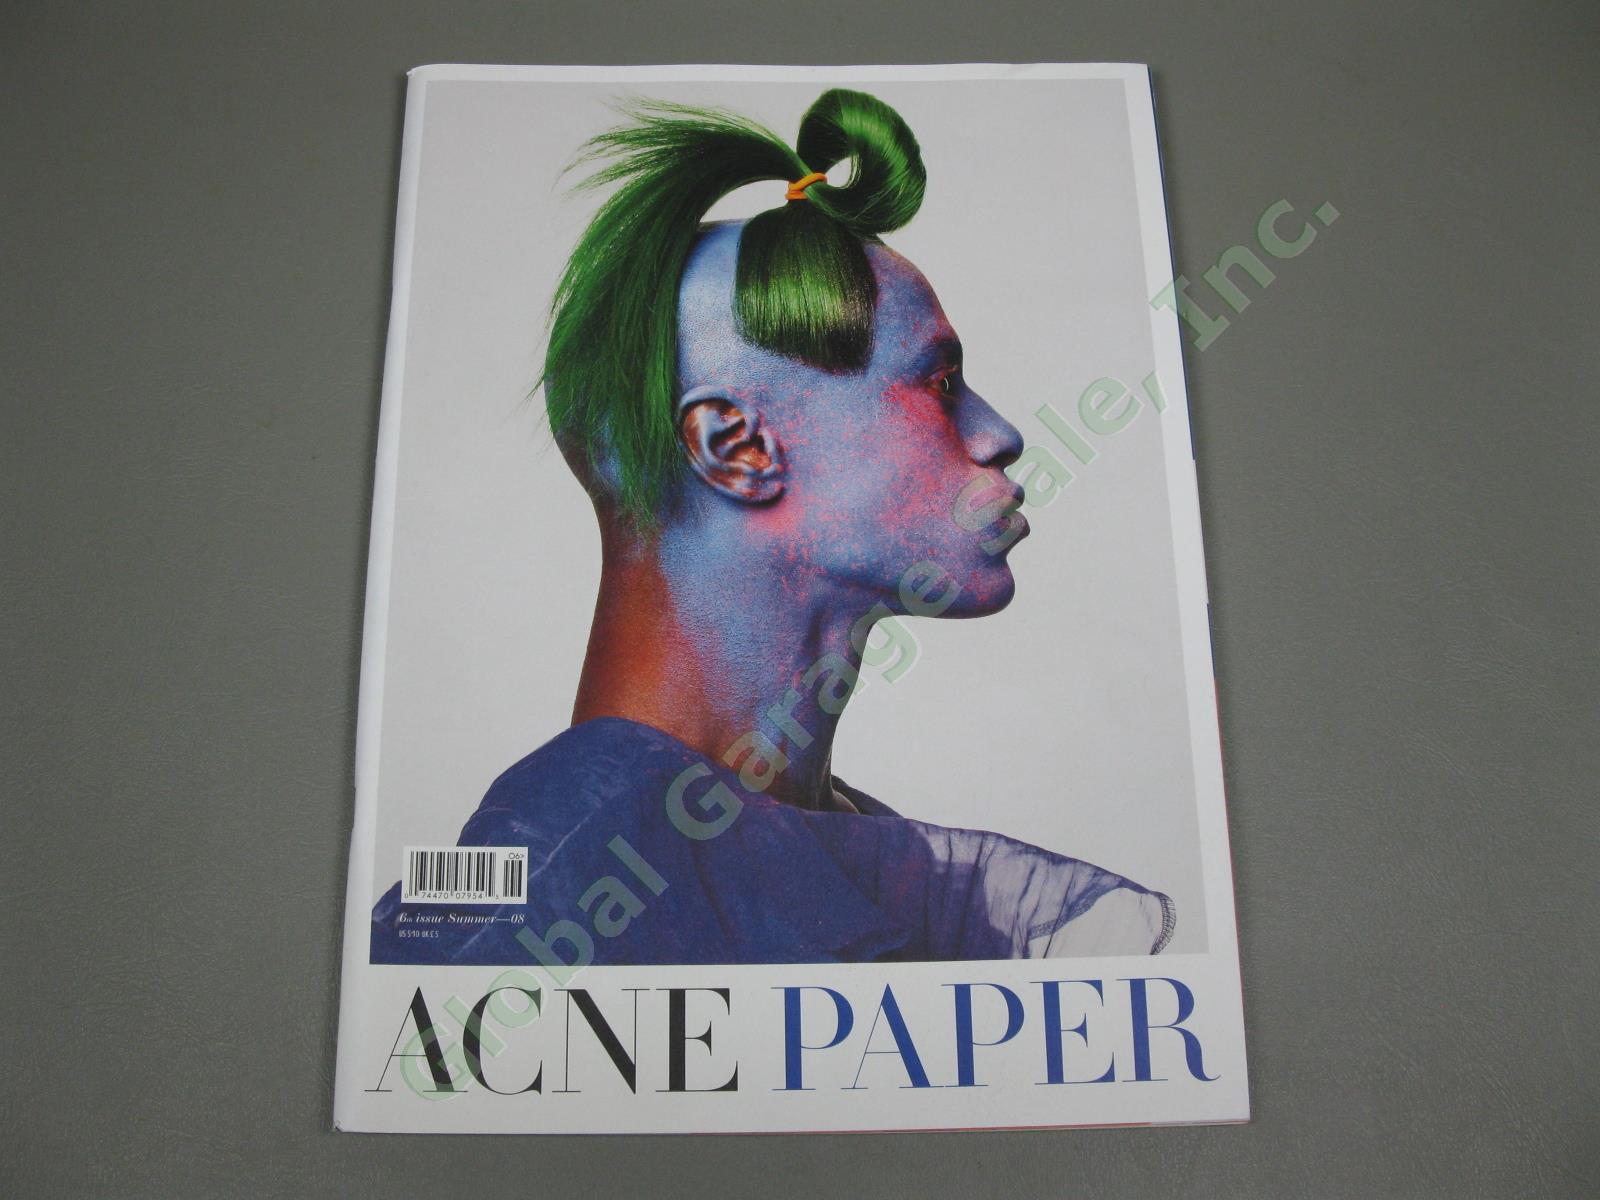 5 Acne Paper Magazines Lot 2007-2010 Issues #4-9 Photography Book Collection NR 9